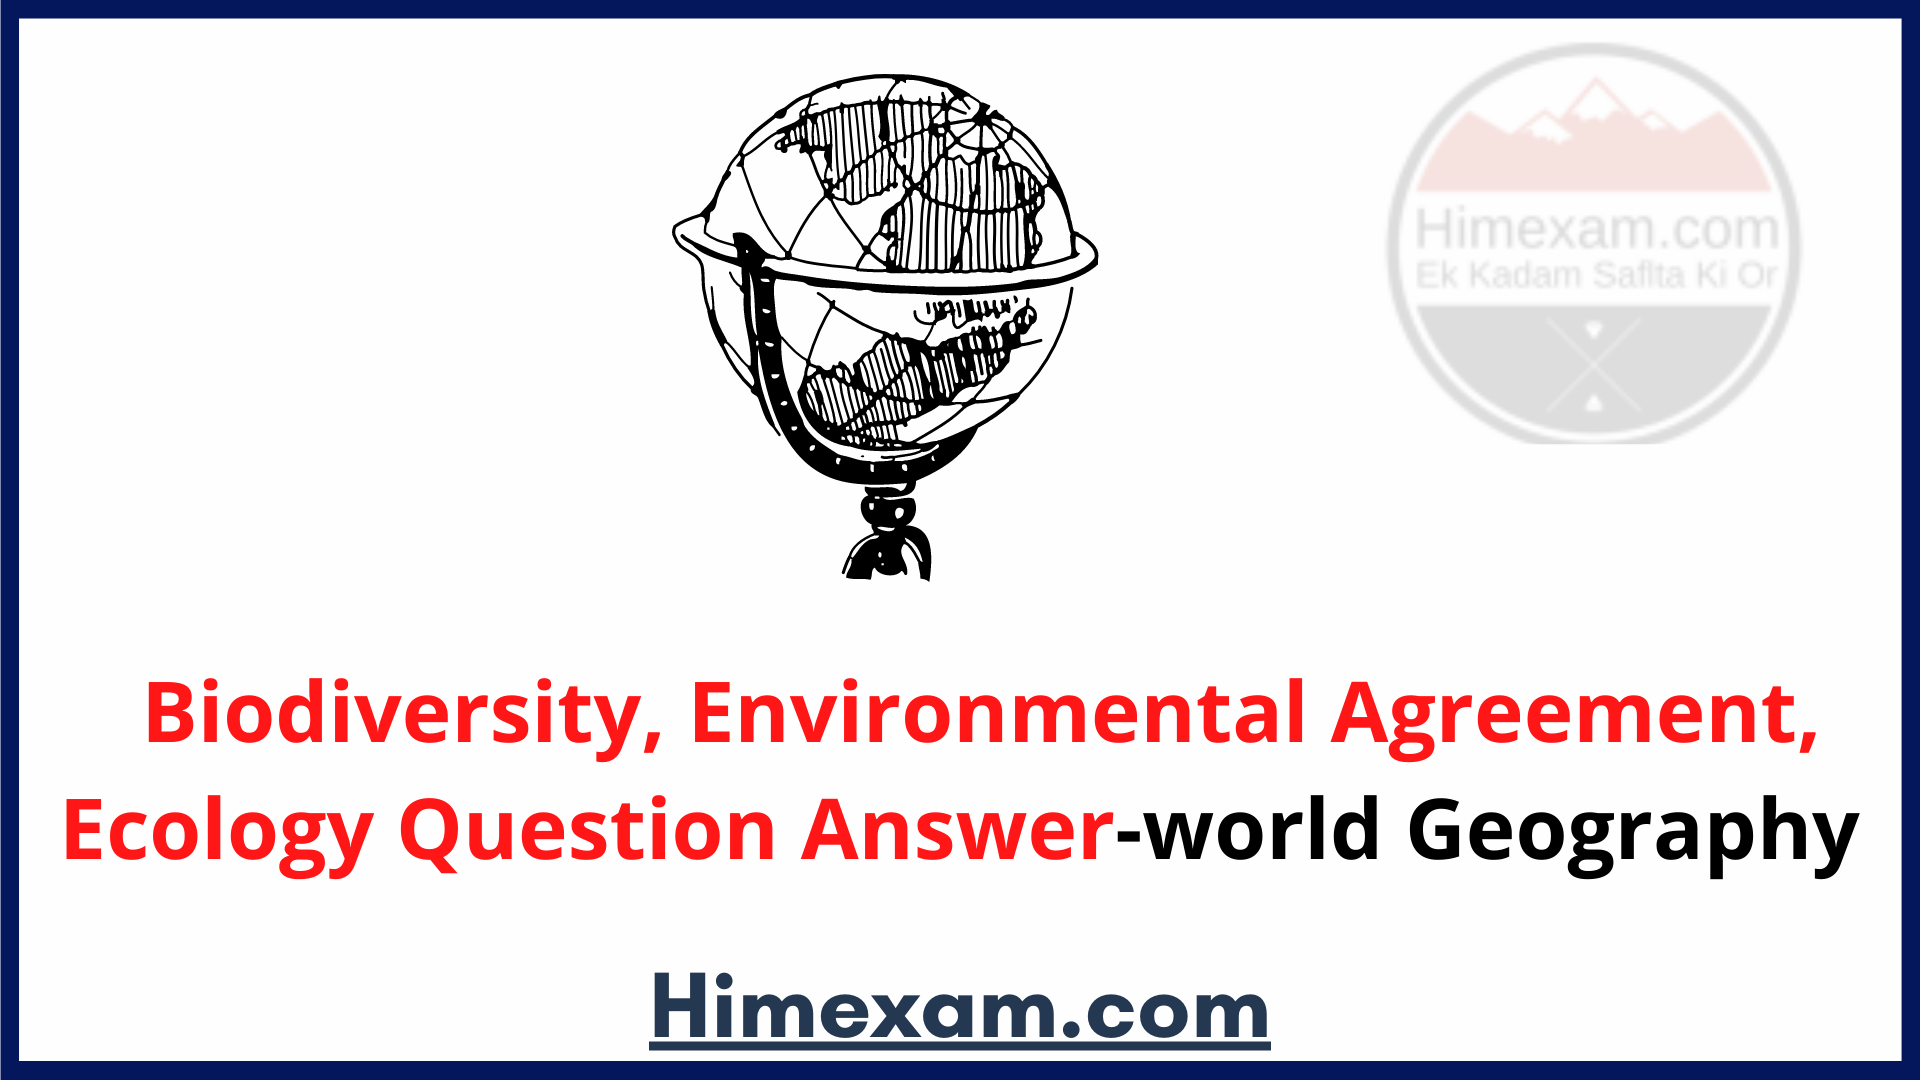 Biodiversity, Environmental Agreement, Ecology Question Answer